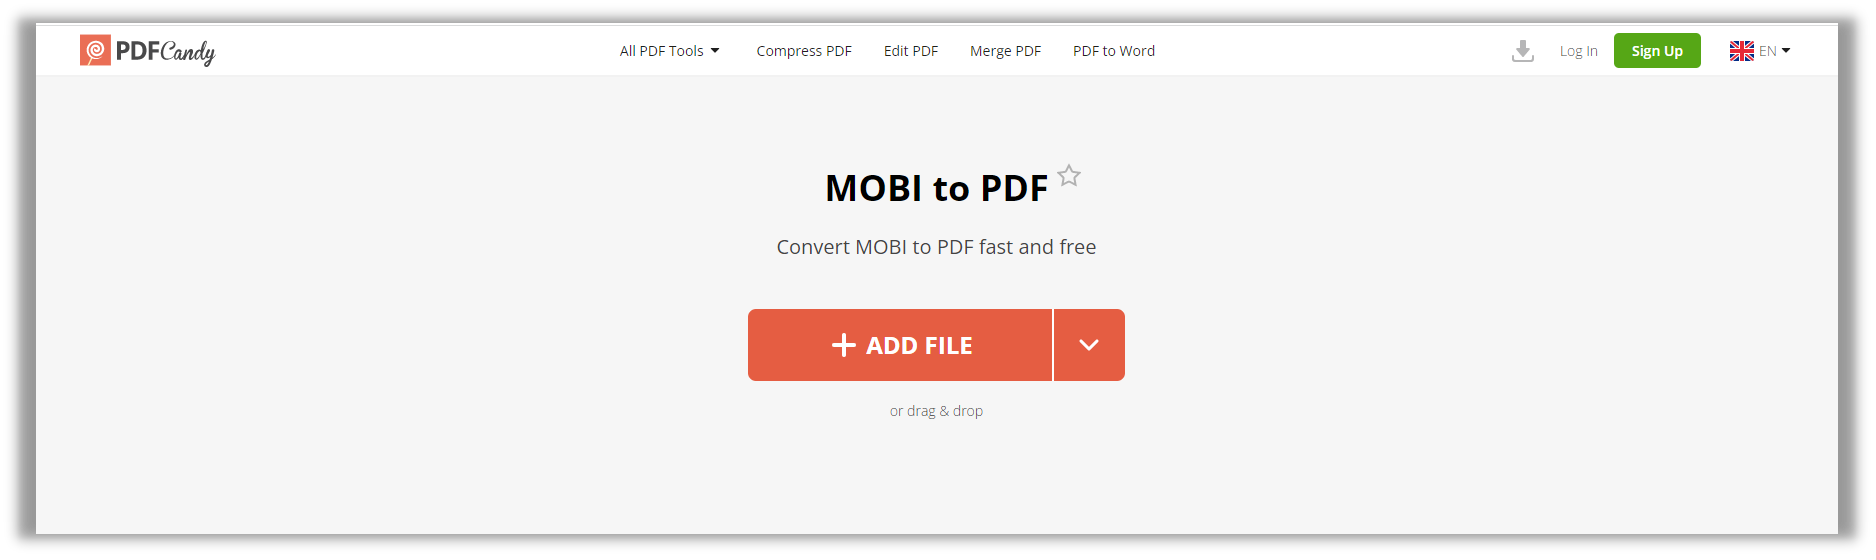 How to convert MOBI to PDF in PDFCandy